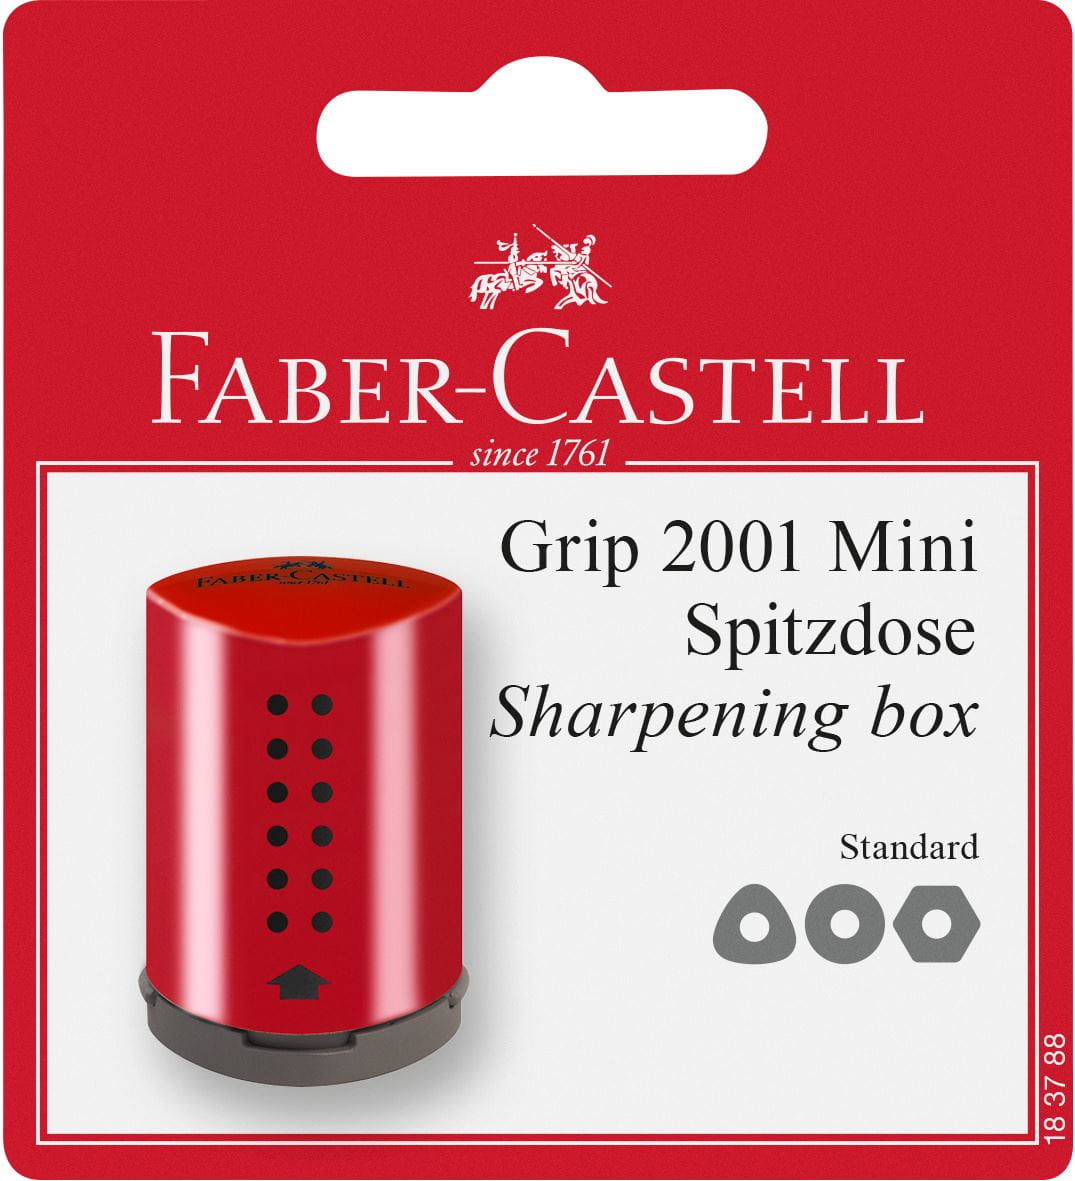 Faber-Castell - Grip Mini sharpening box, set of 1, red/blue, sorted